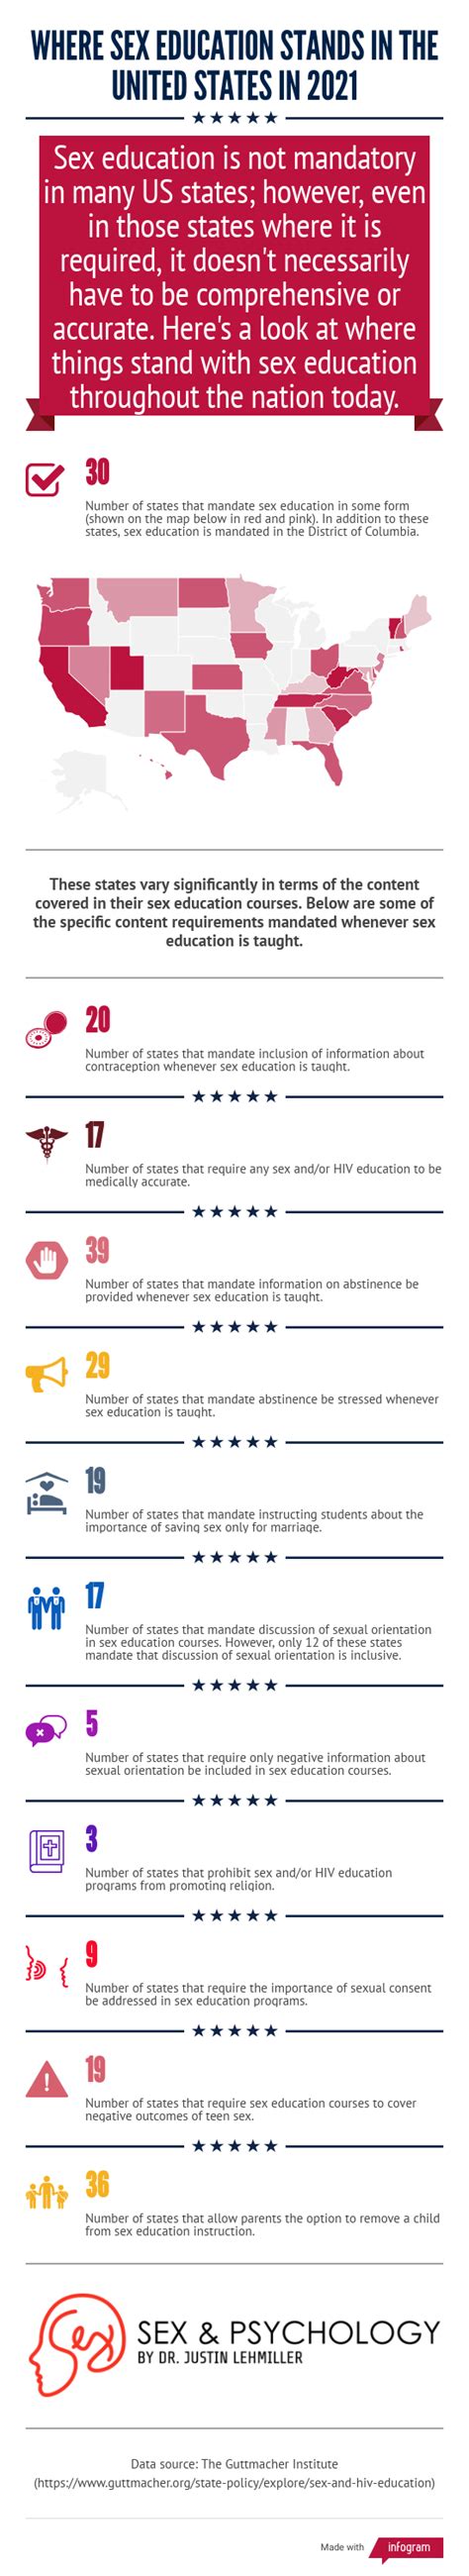 The State Of Sex Education In The United States In 2021 Infographic